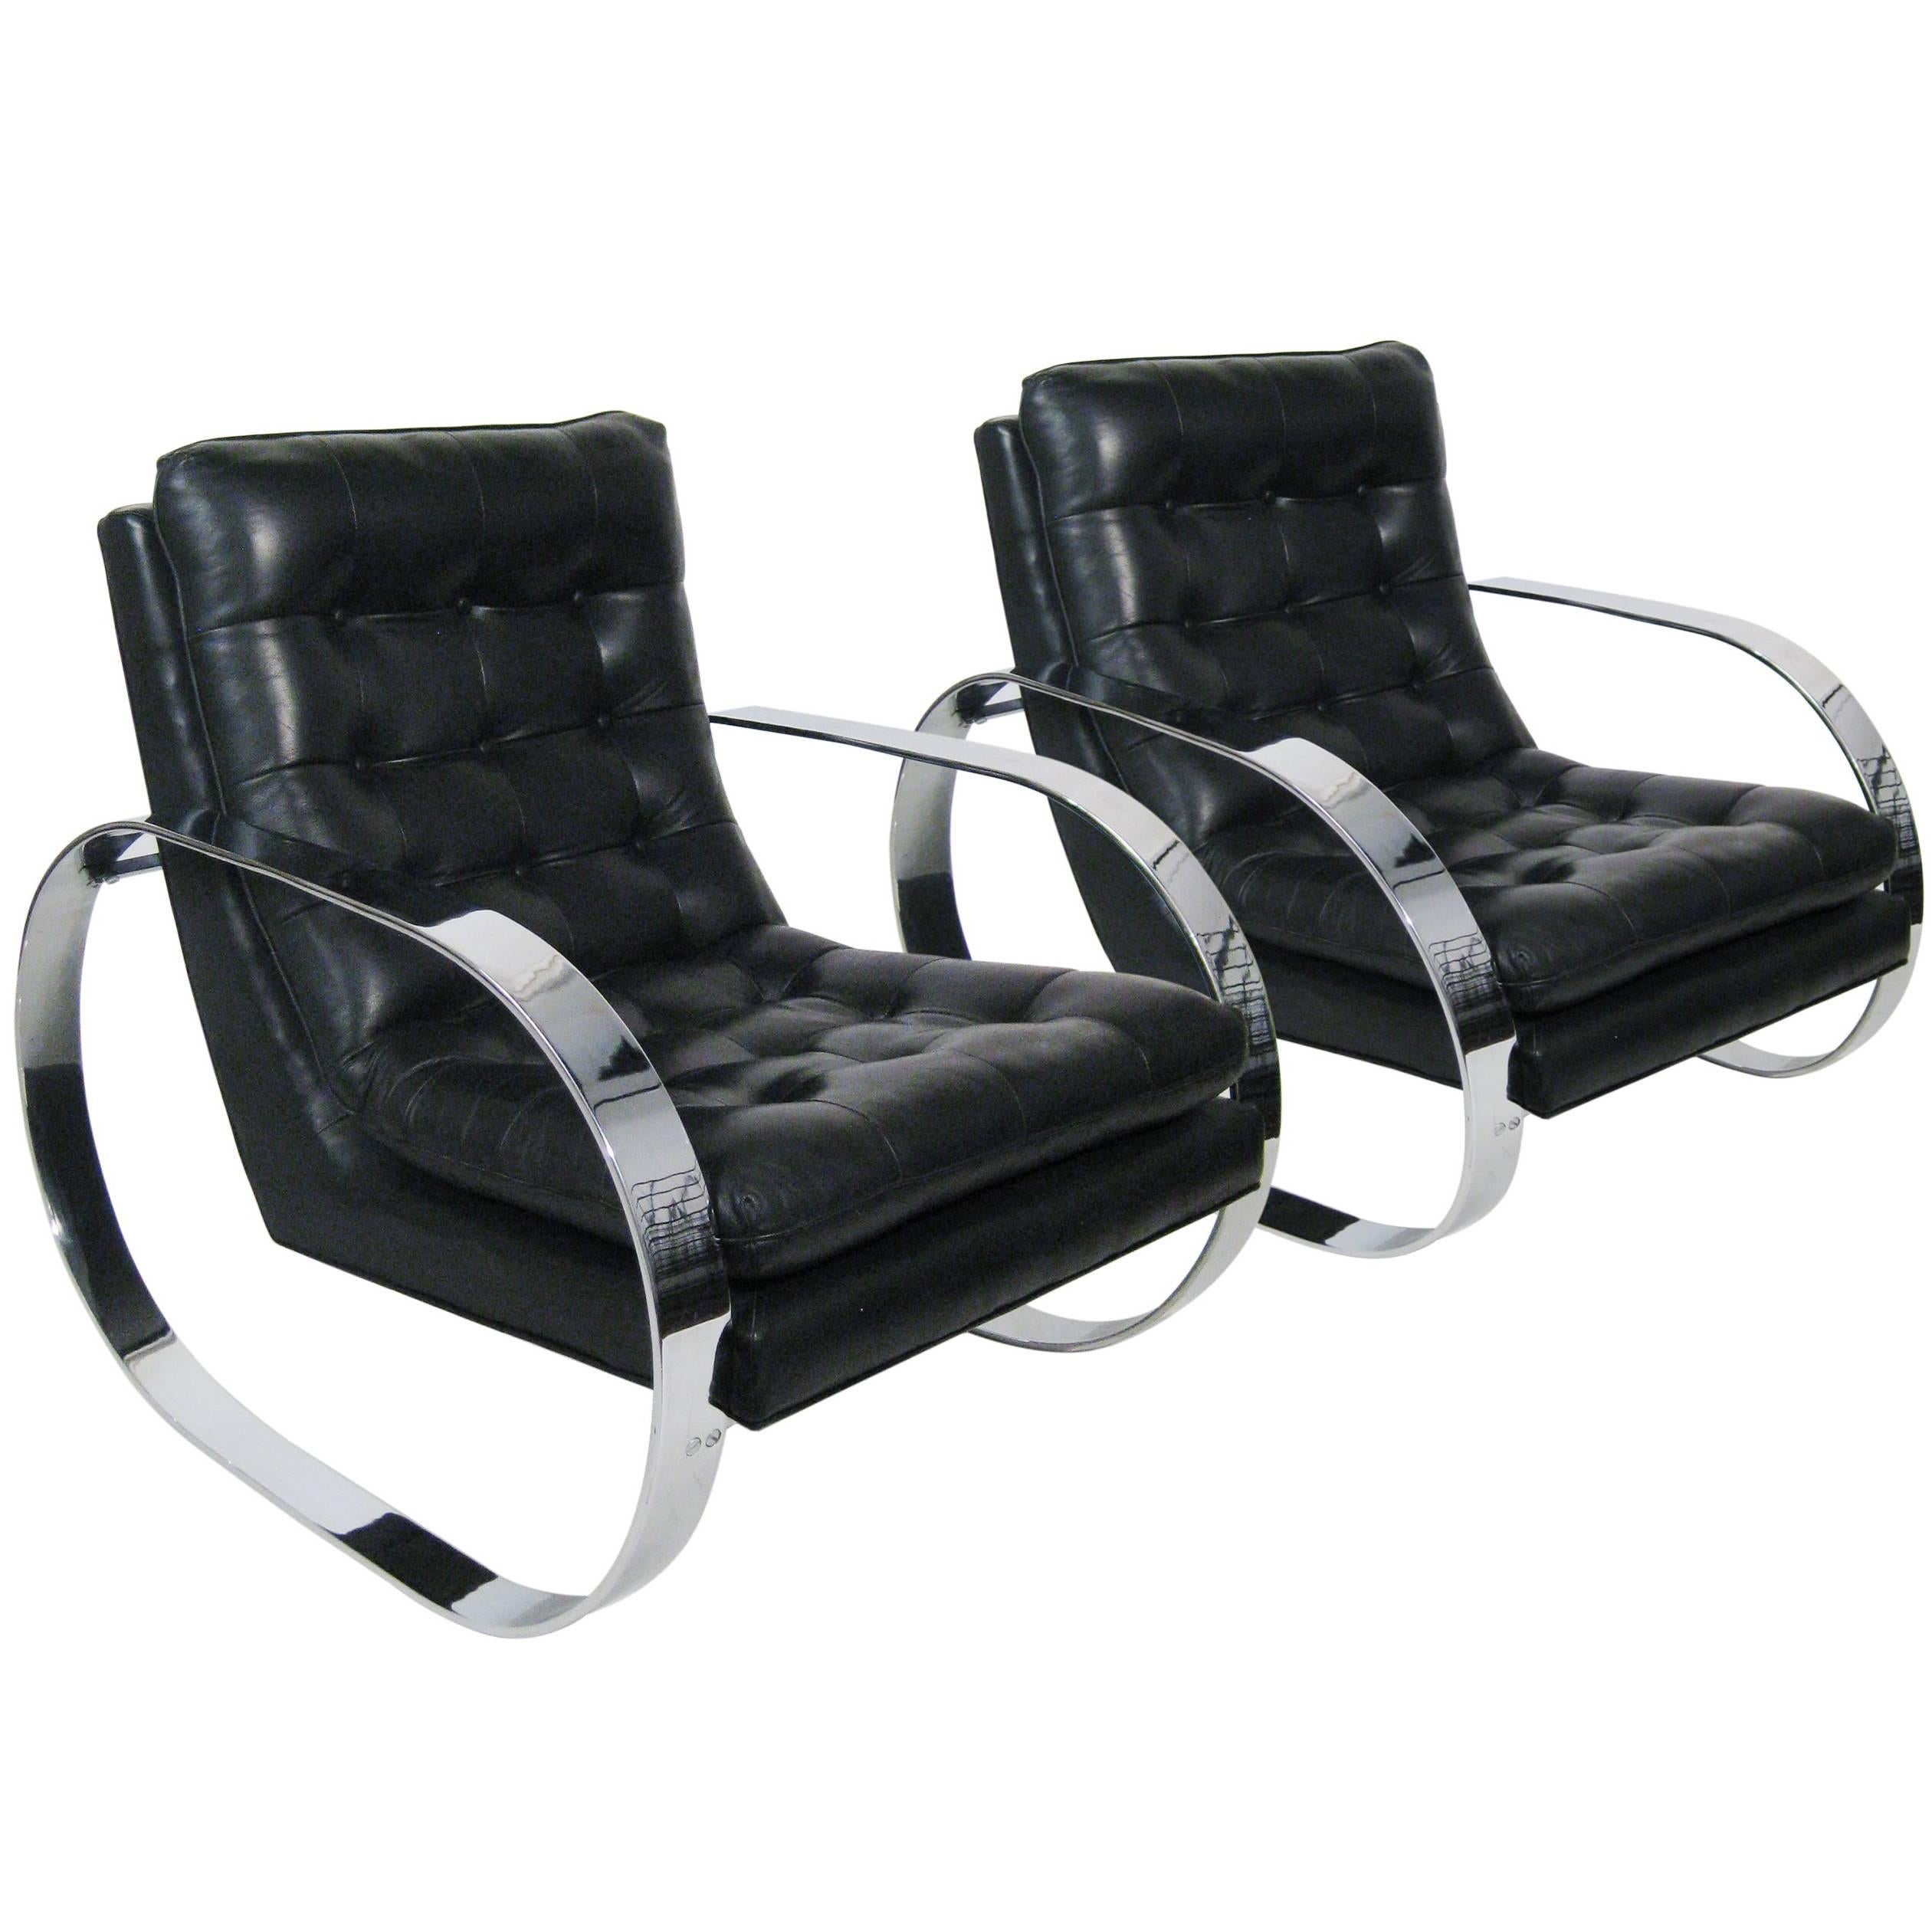 Pair of Armchairs, Chrome with Leather, Mexico, circa 1970 For Sale